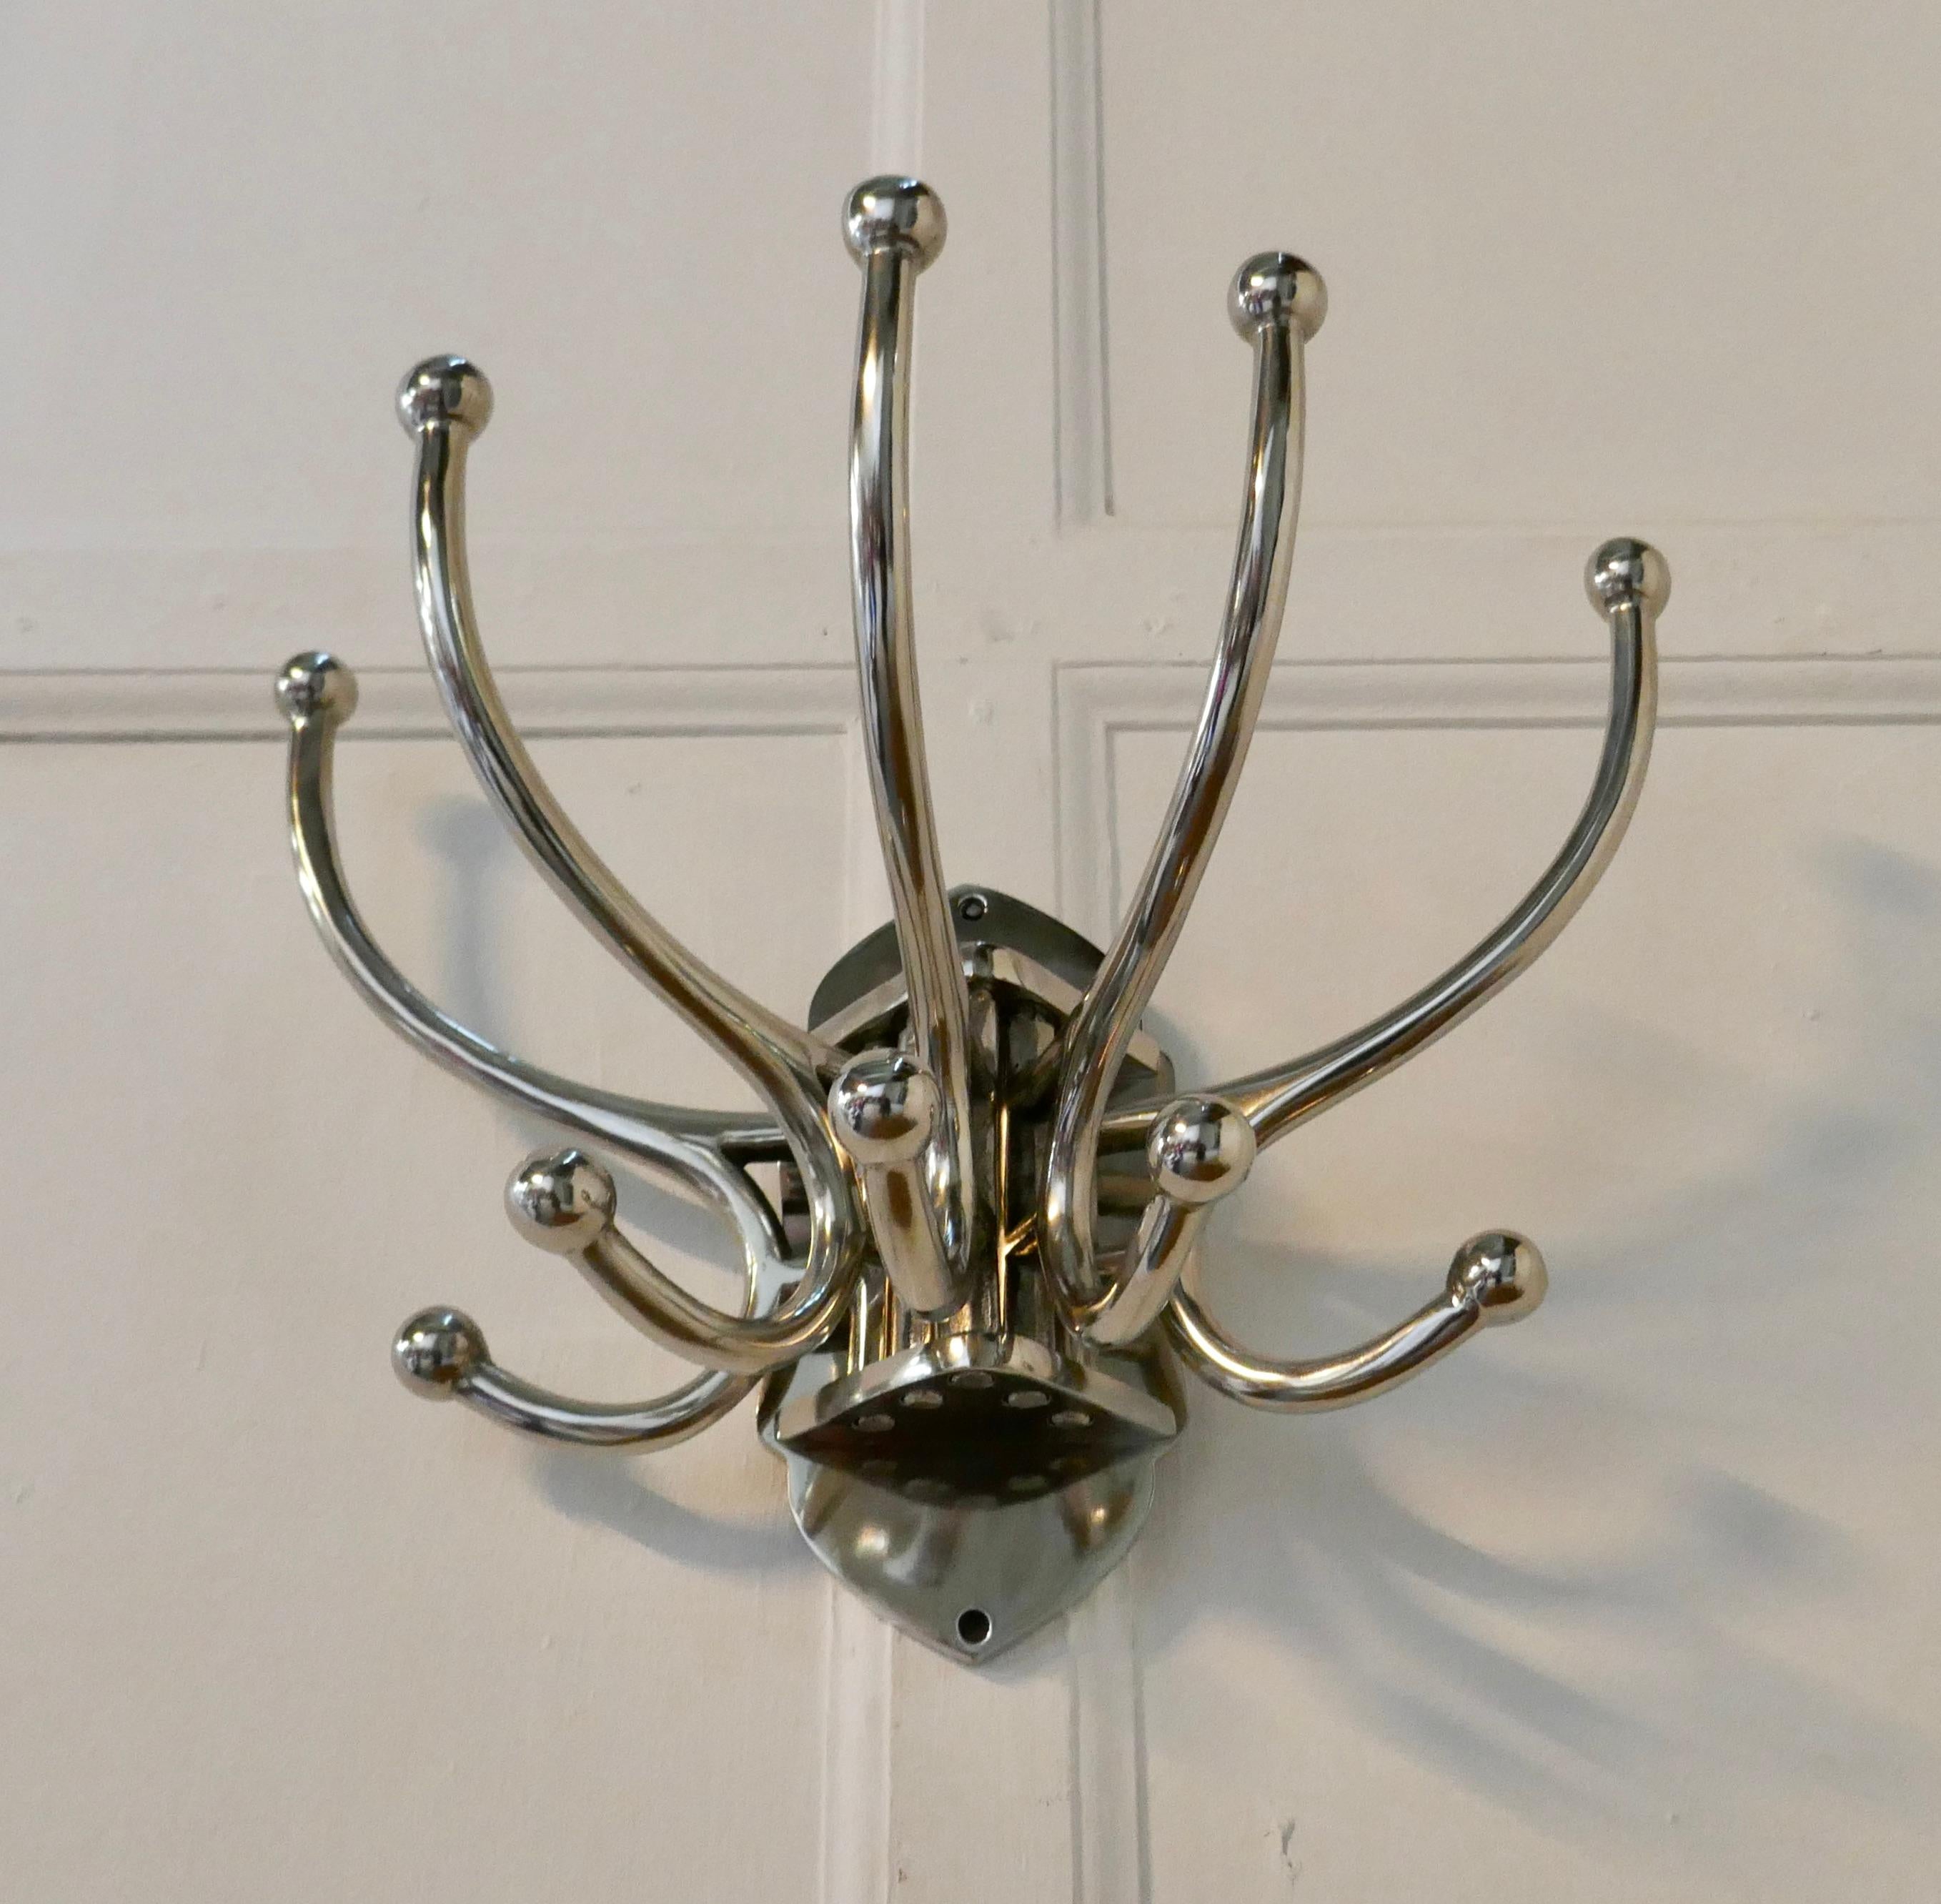 Art Deco Style French Chrome Coat Rack, Hat and Coat Hooks

Very Stylish Chrome Cloakroom Hanging bracket
The rack has 5 double swan neck hooks, these swing to the sides when required to fold flat
Strong and chunky a great idea
The bracket is